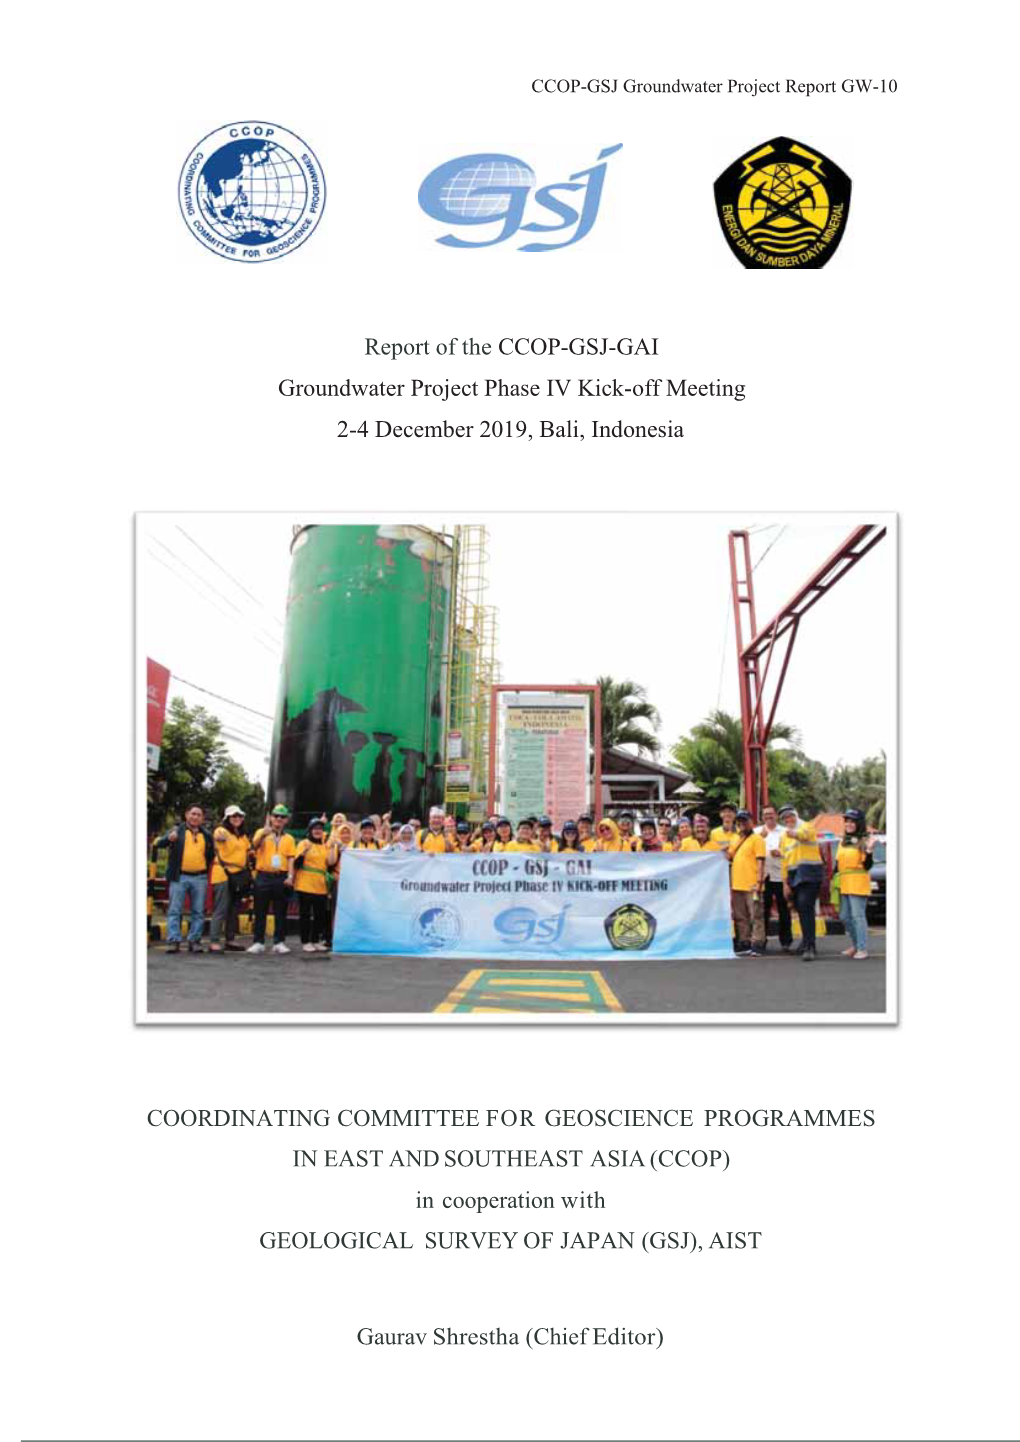 Report of the CCOP-GSJ-GAI Groundwater Project Phase IV Kick-Off Meeting, 2-4 December 2019, Bali, Indonesia